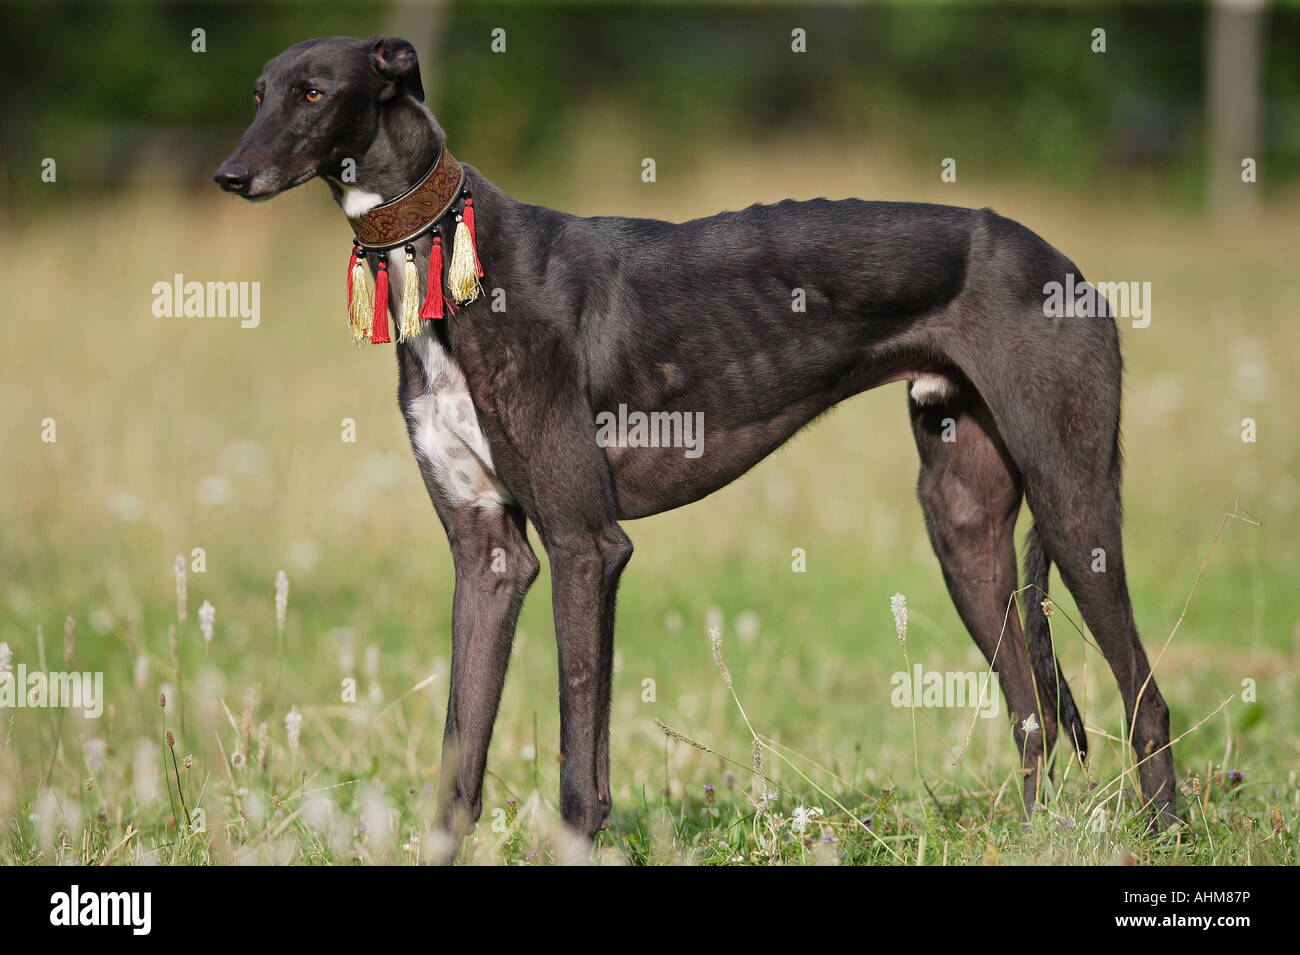 Greyhound - standing on meadow Banque D'Images